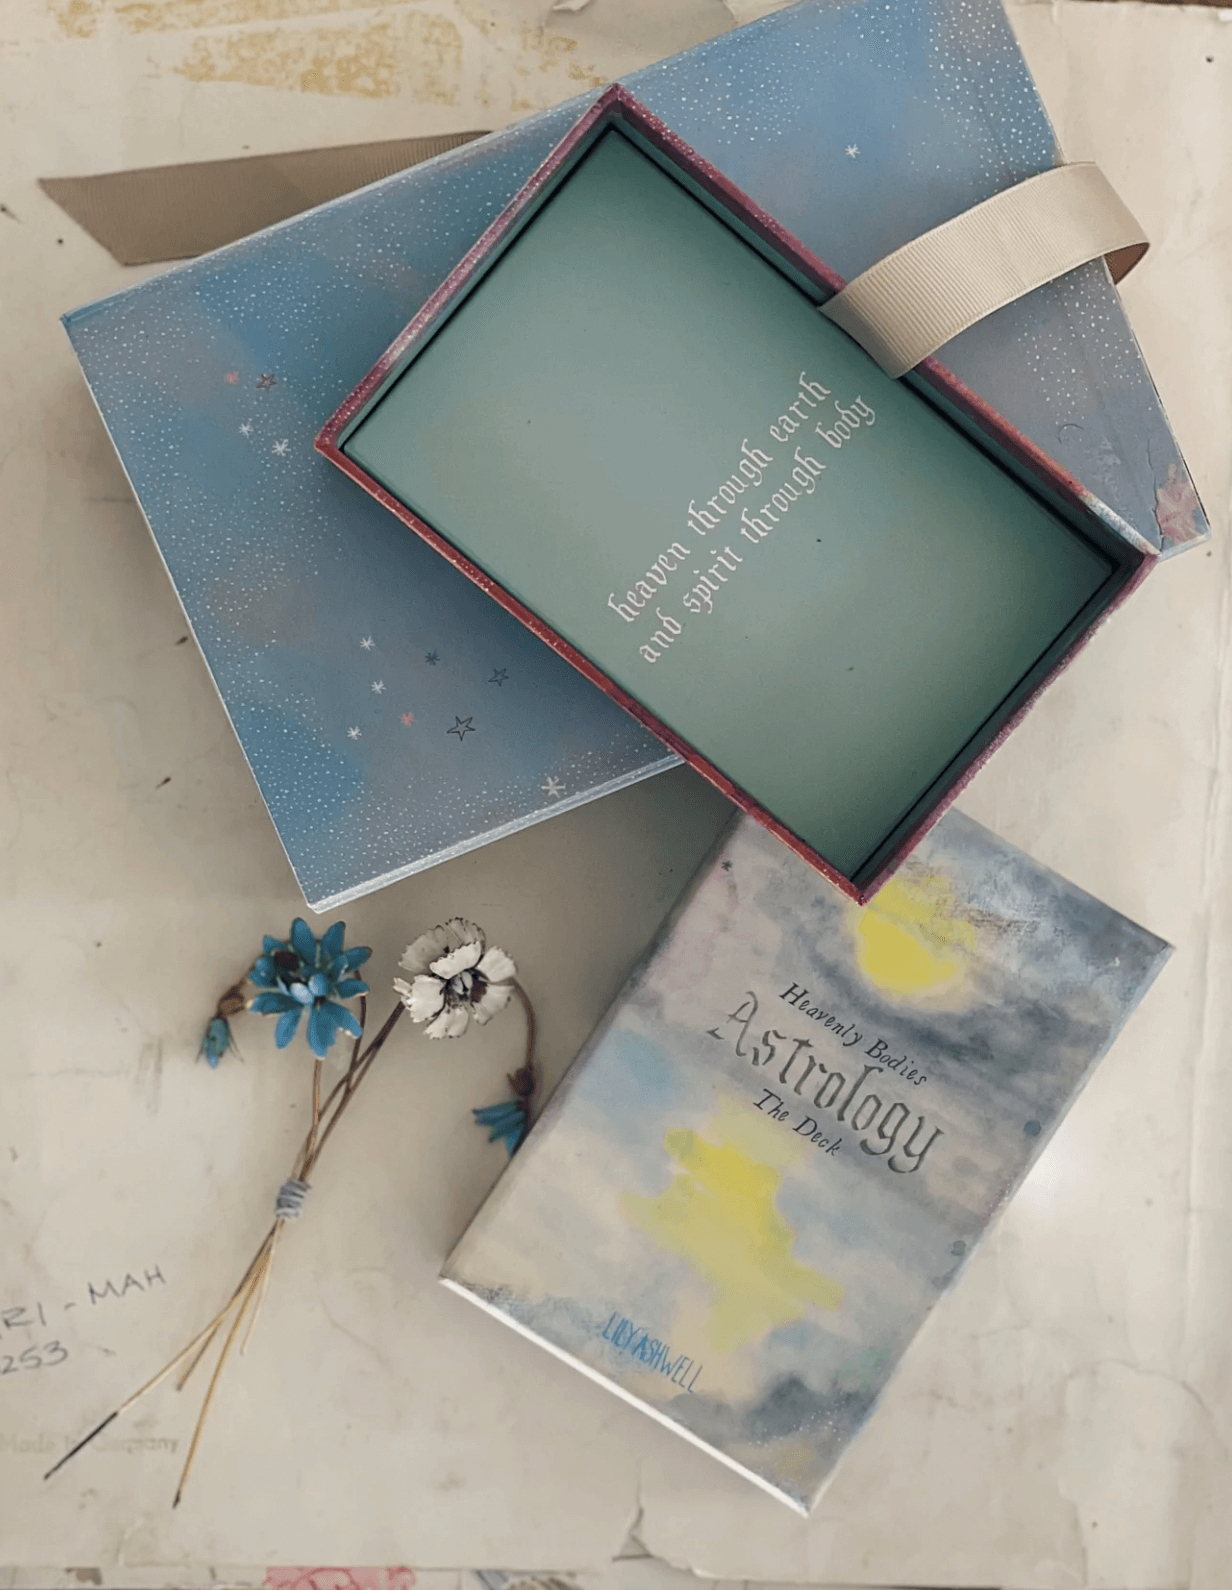 Astrology Oracle Deck and Deluxe Boxset